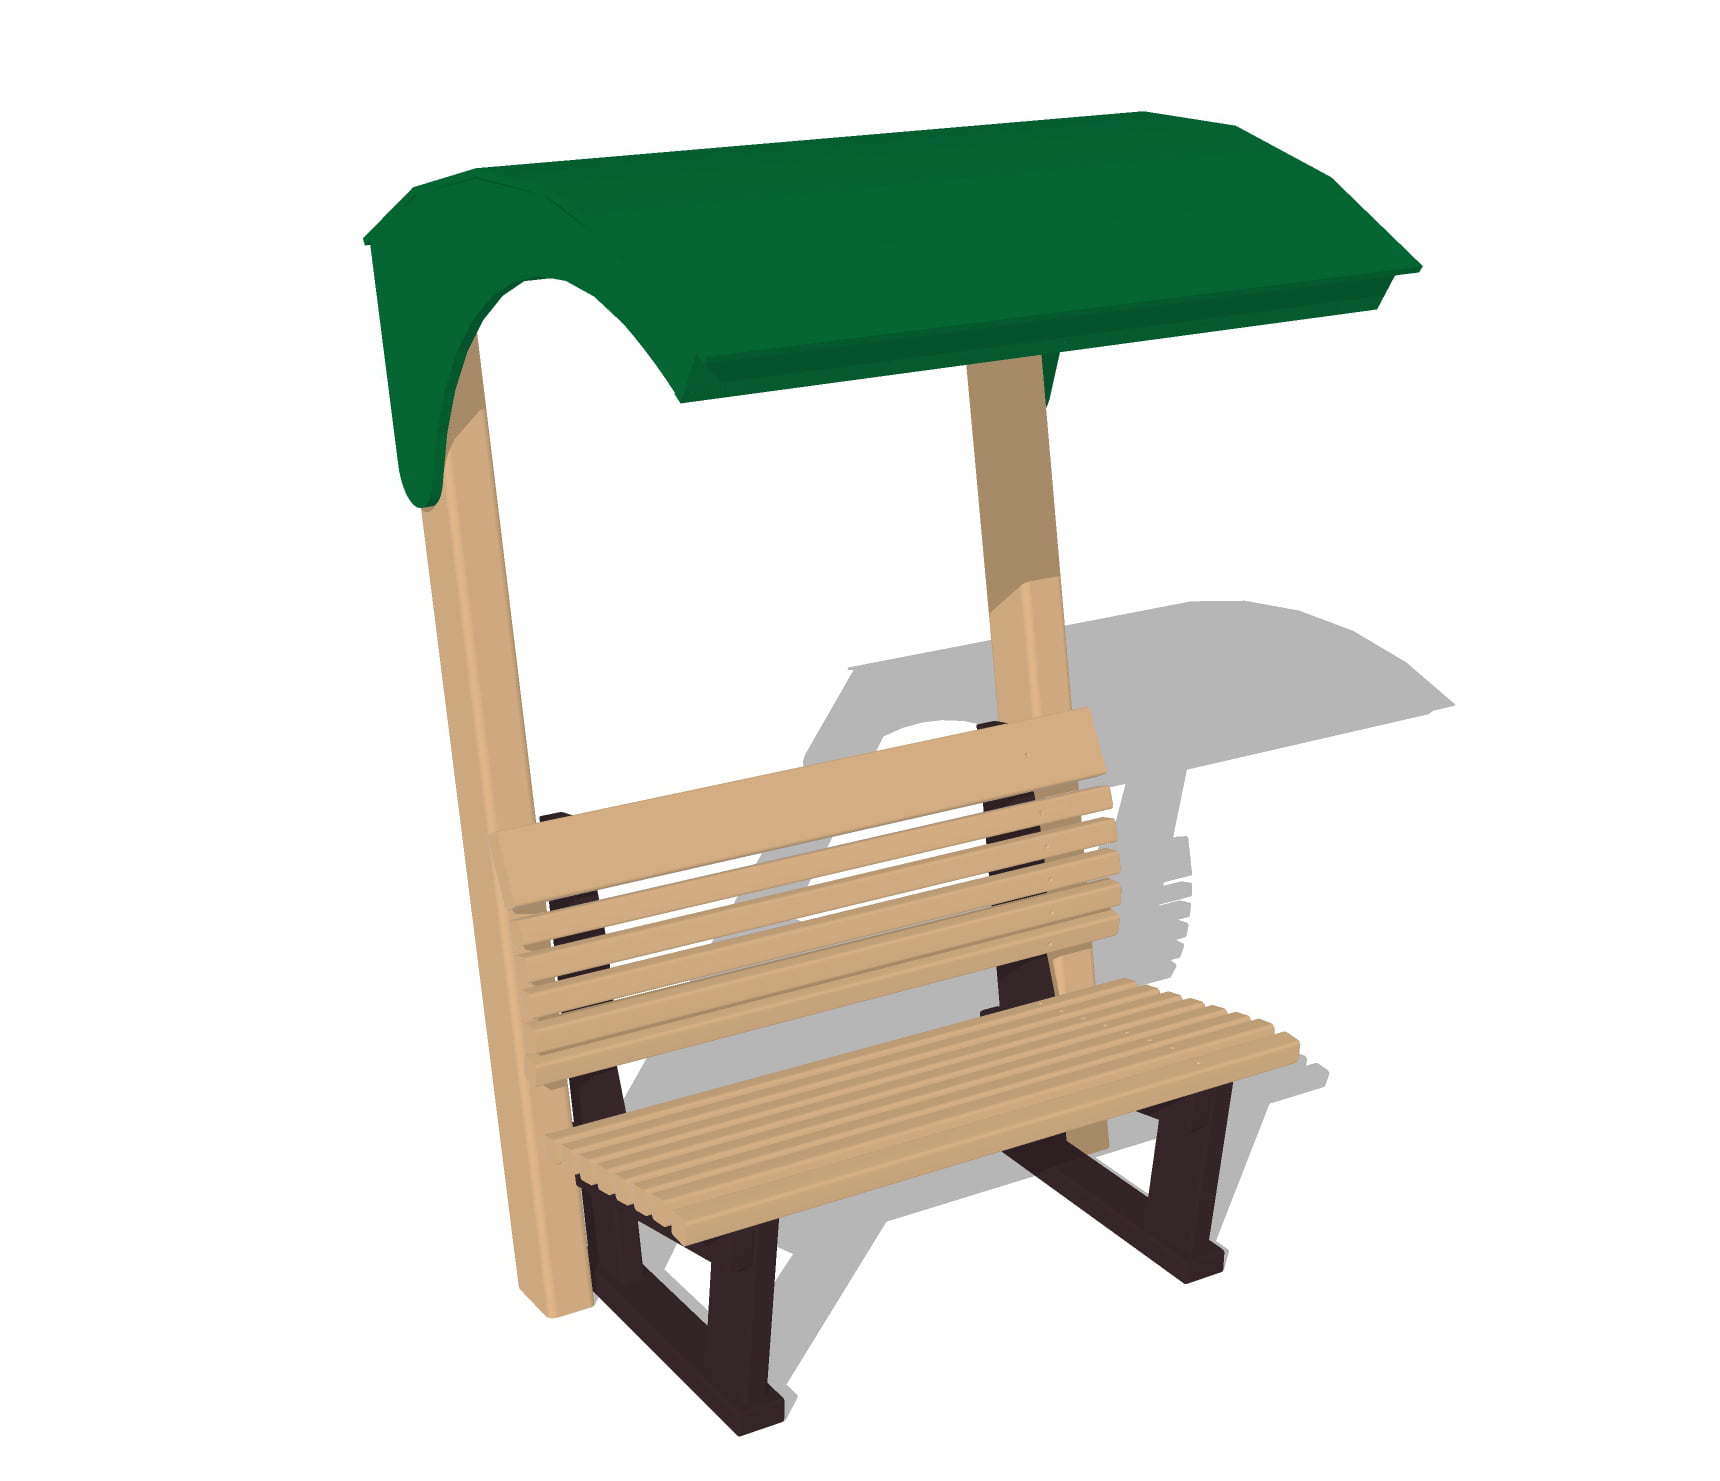 Ergo-Eco Bench with Roof Commercial Playground